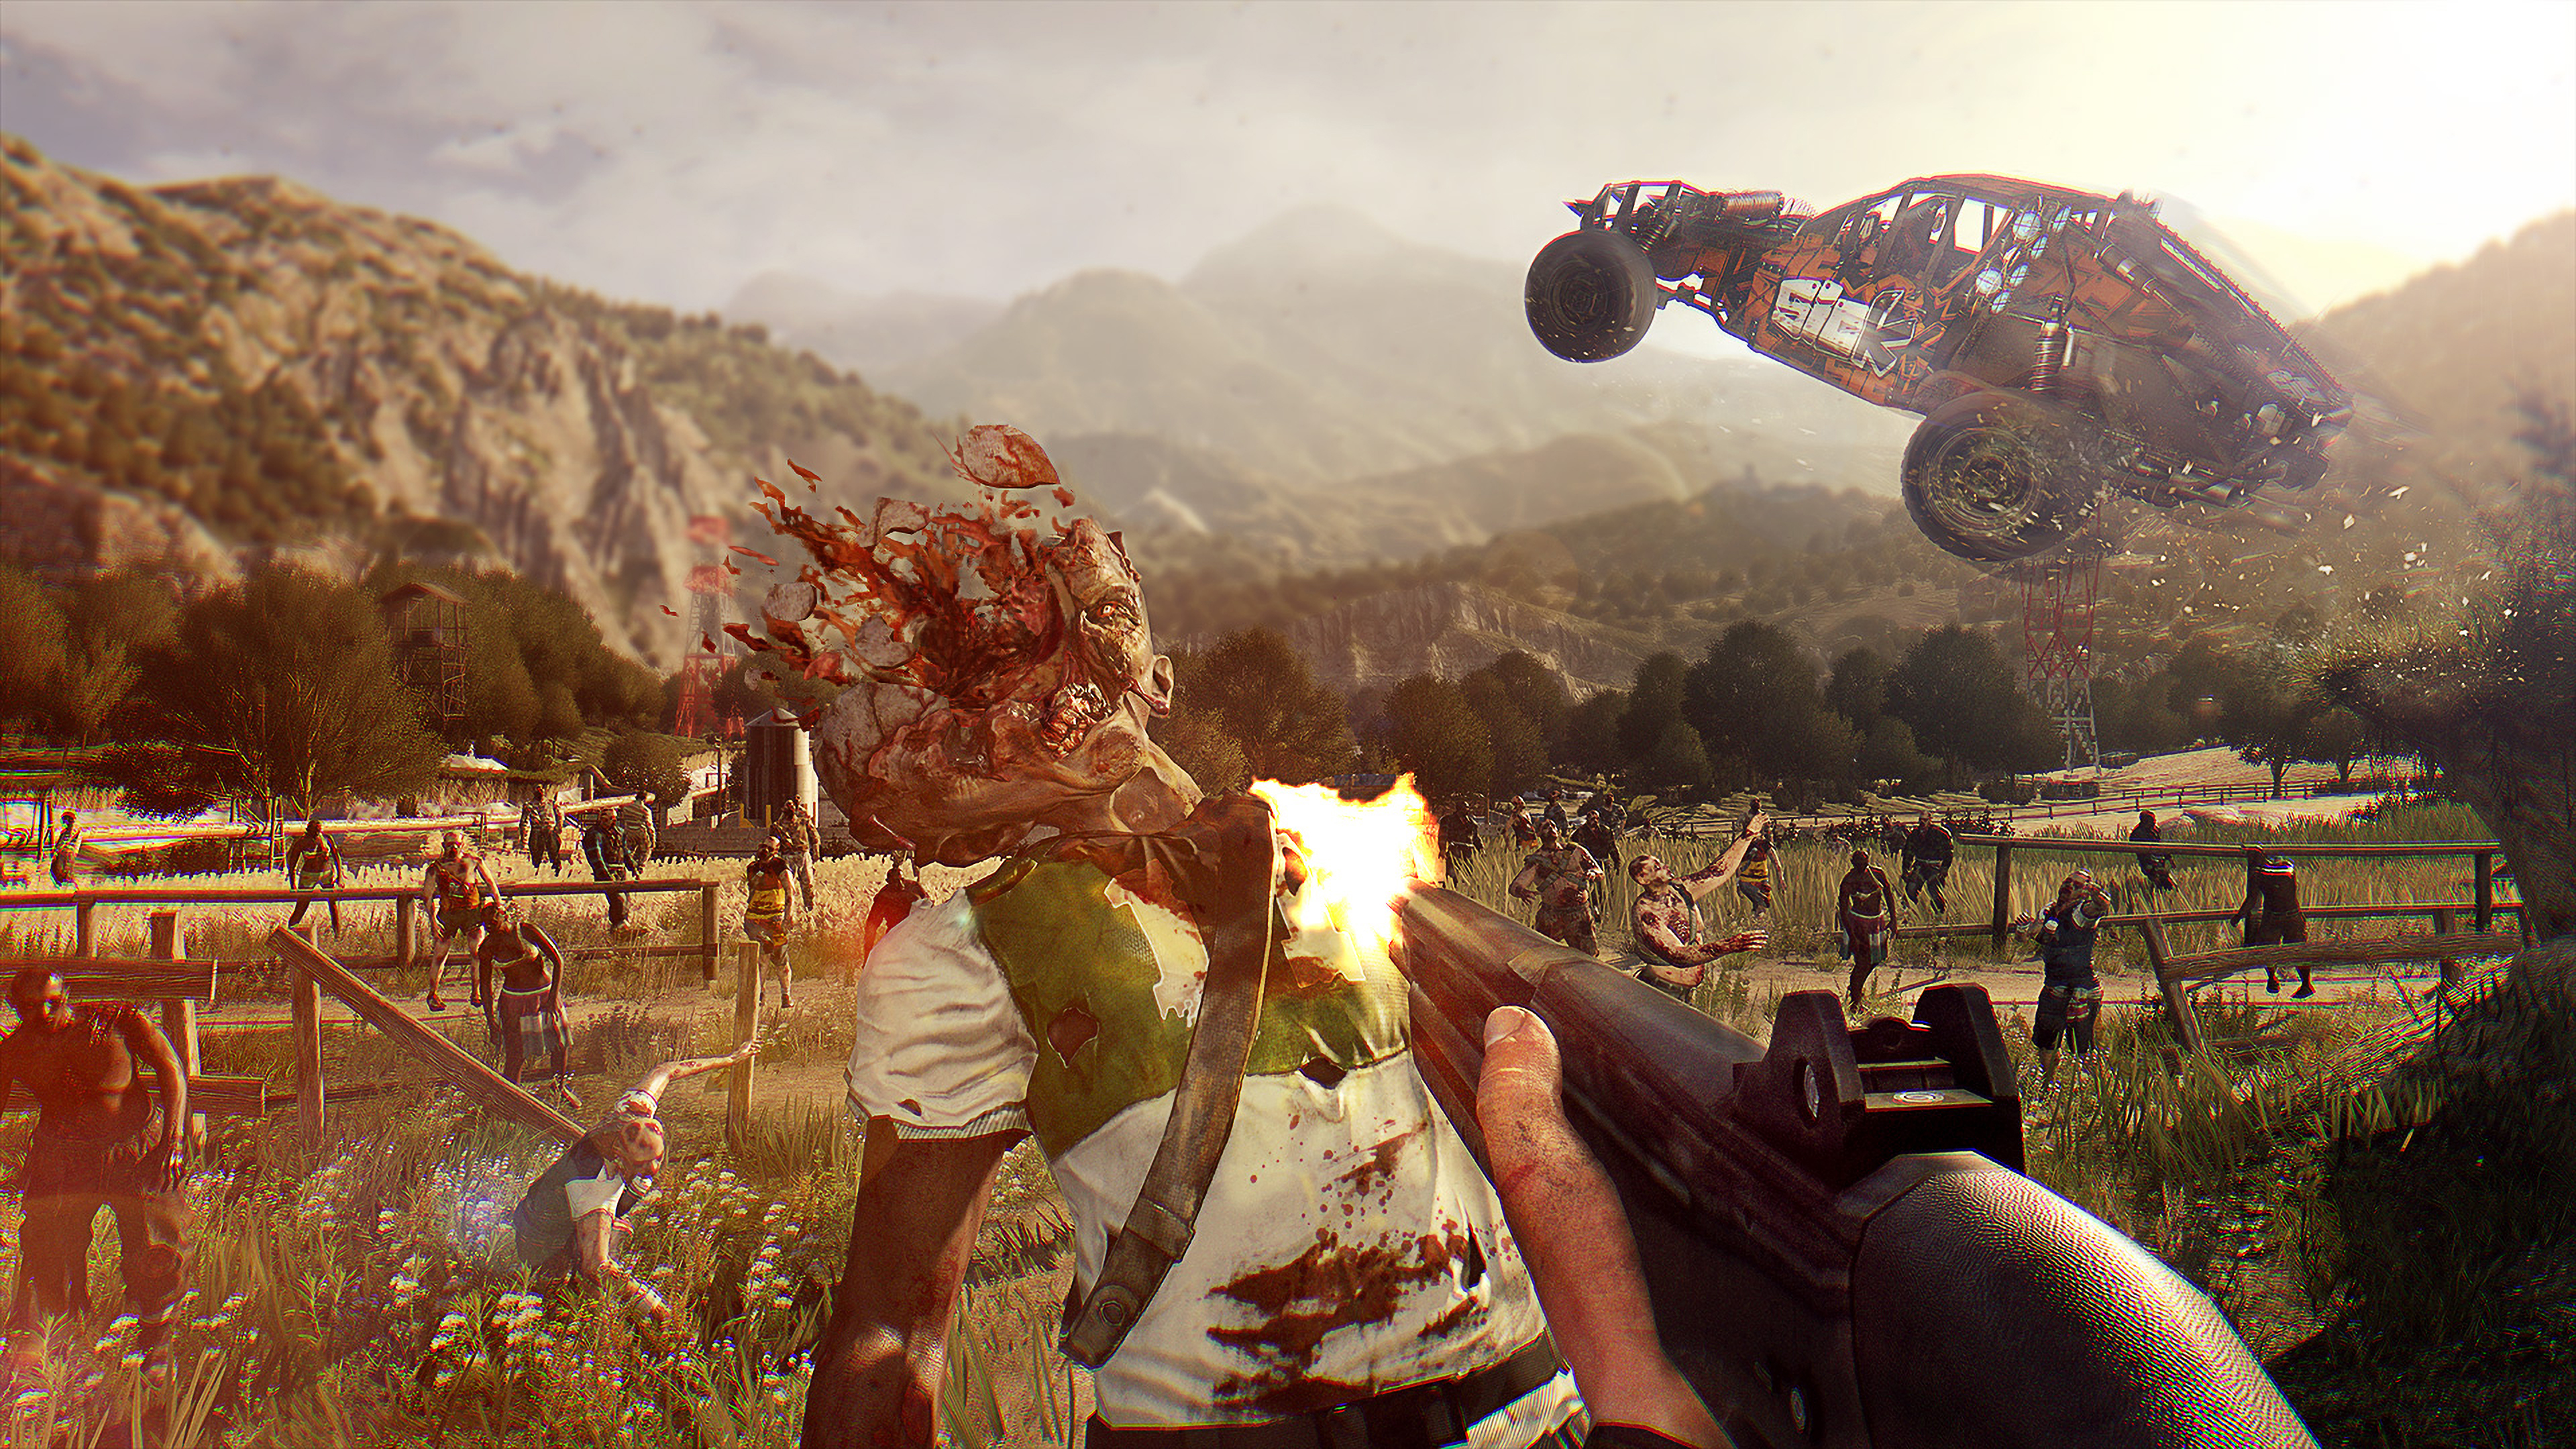 dying light 2 release date switch